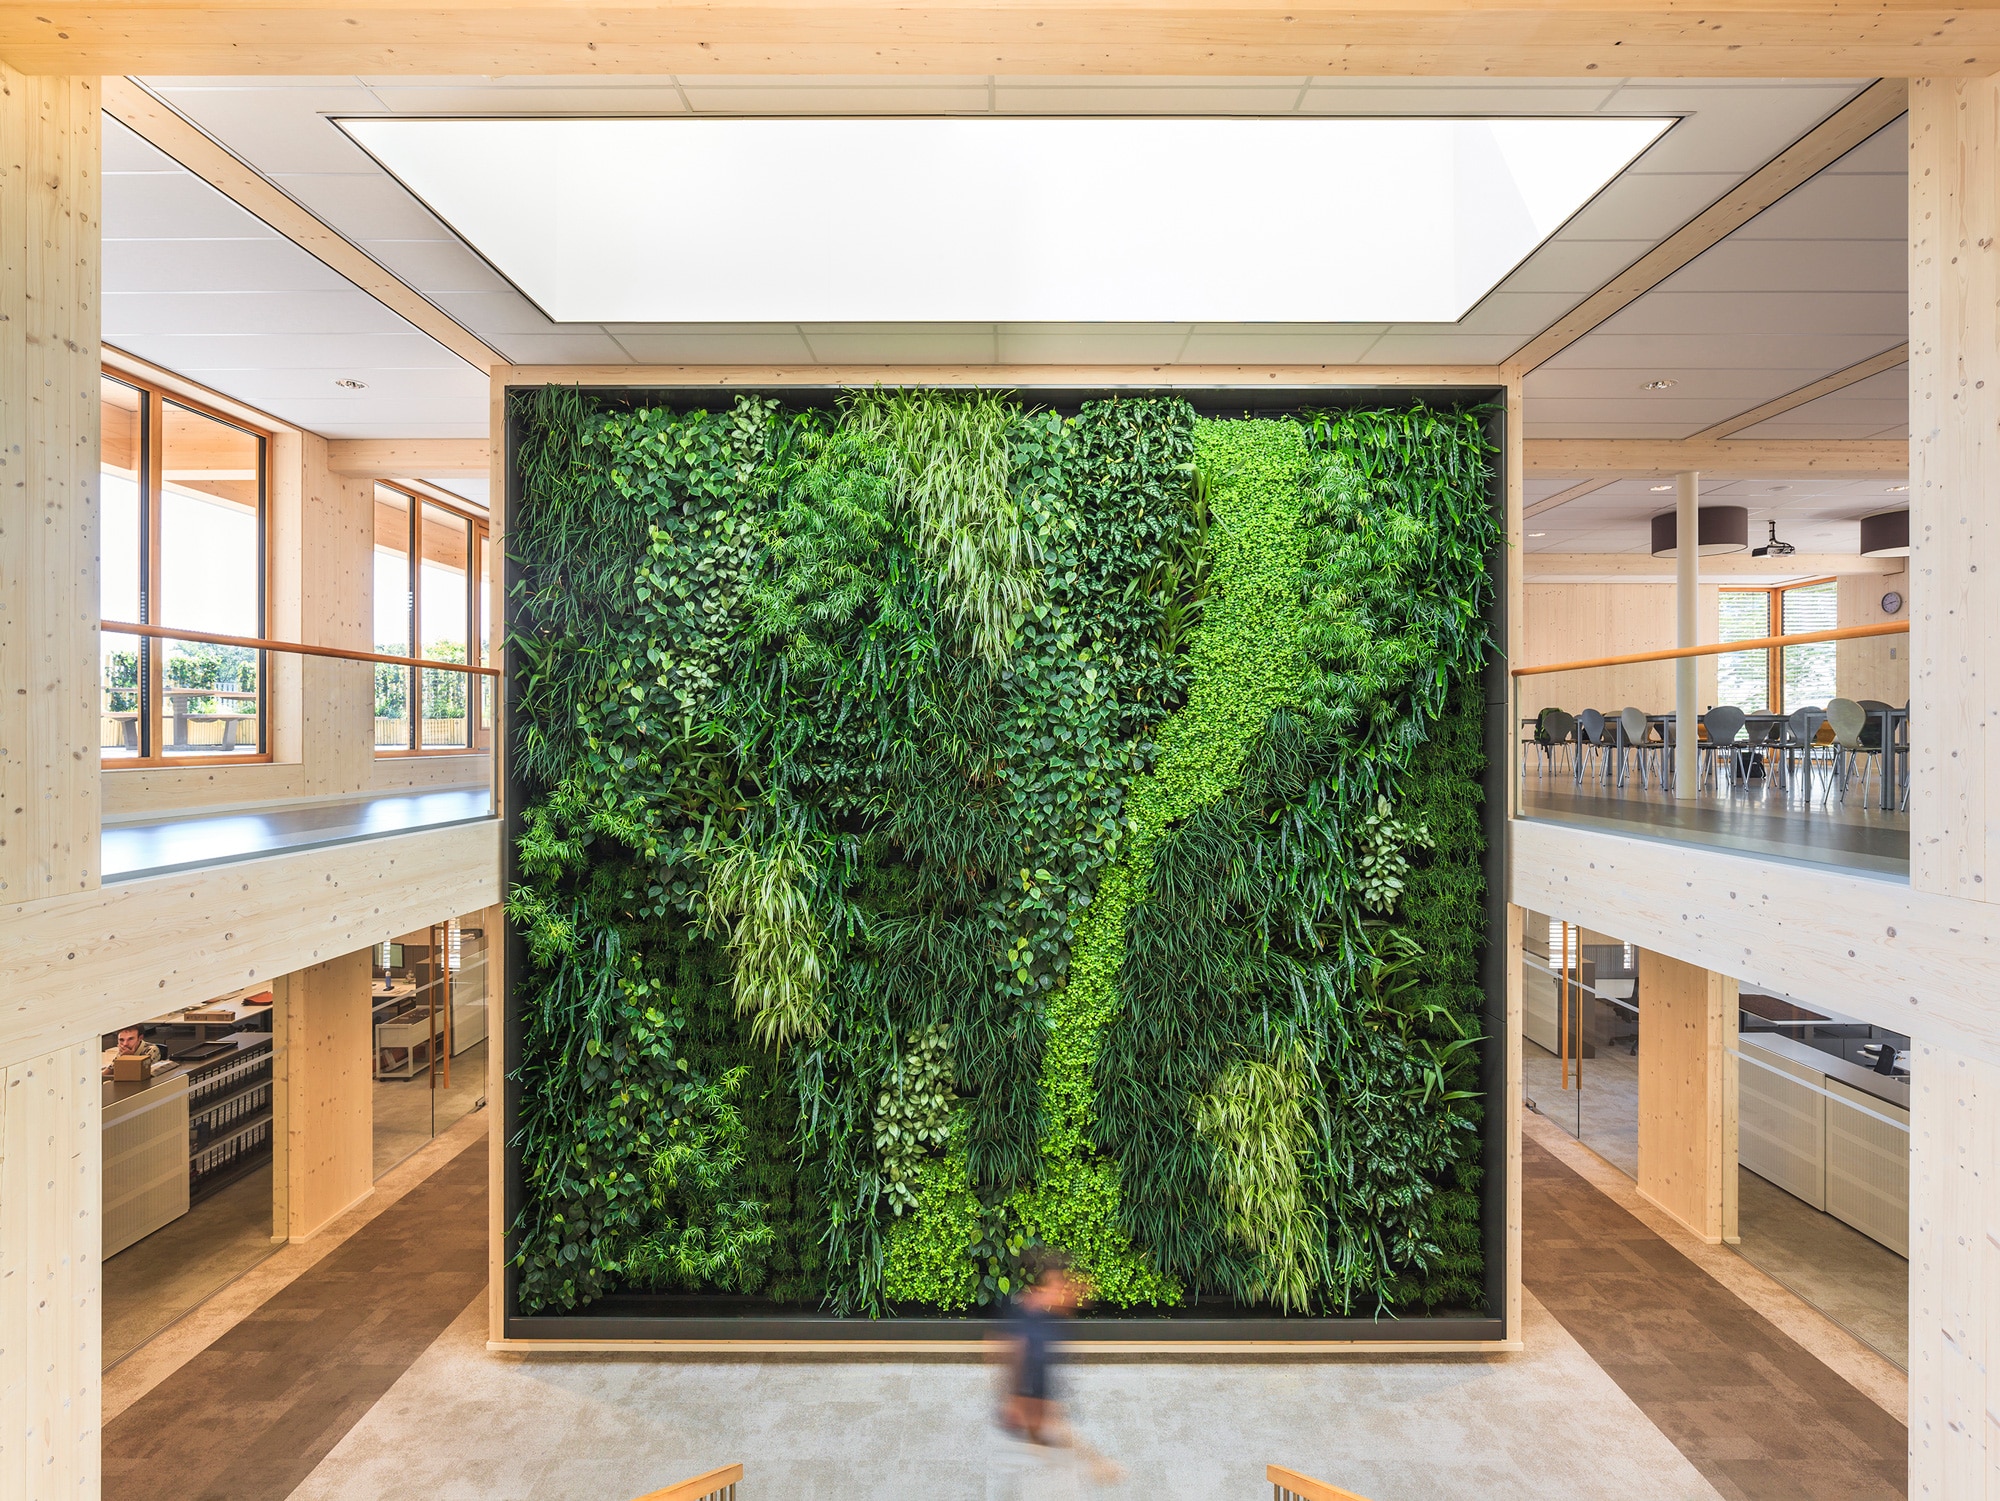 The Greenest Office in the World is in the Netherlands